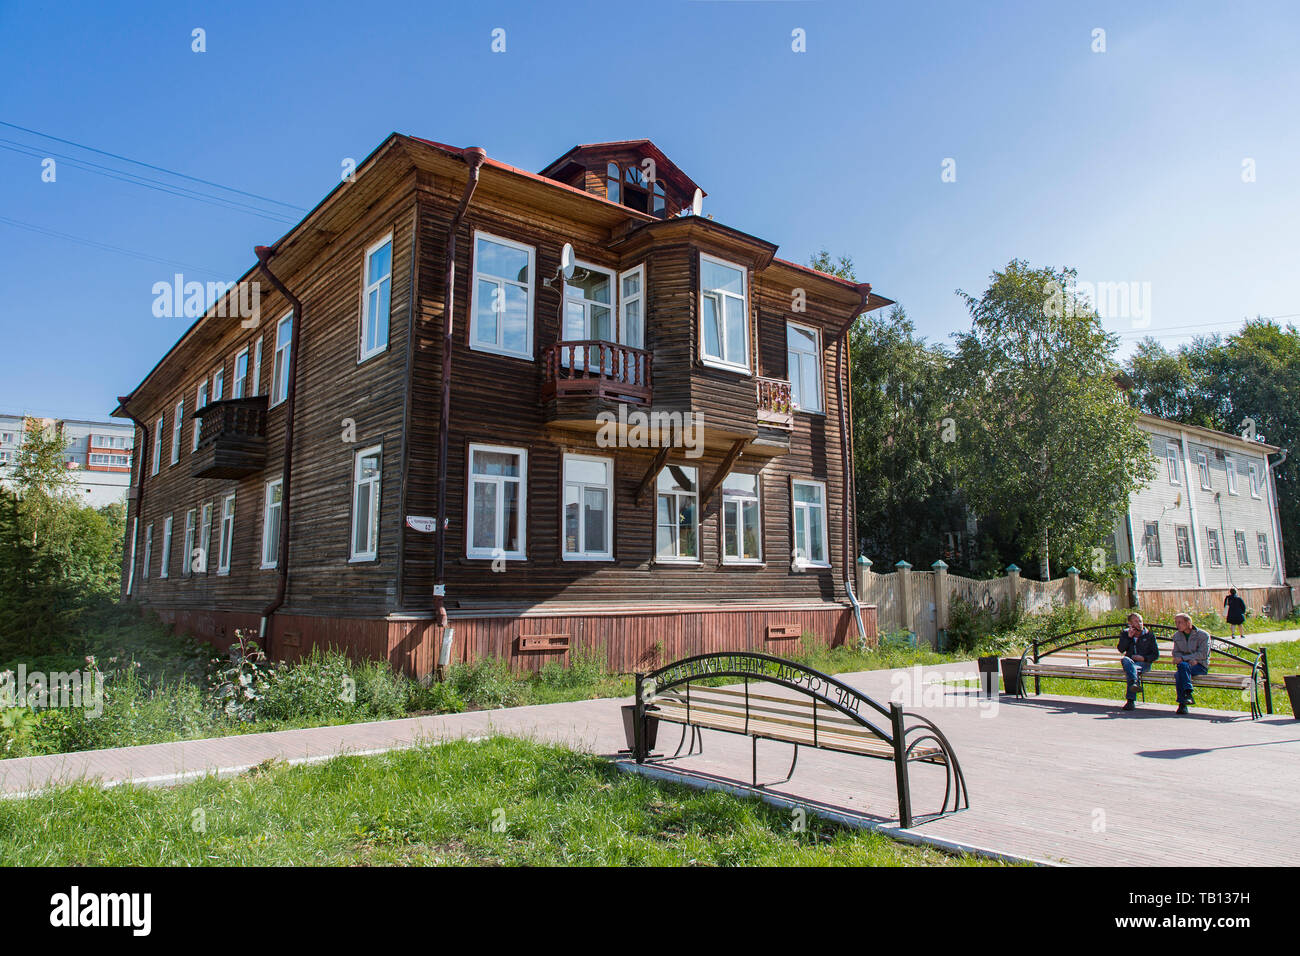 Arkhangelsk High Resolution Stock Photography and Images - Alamy
